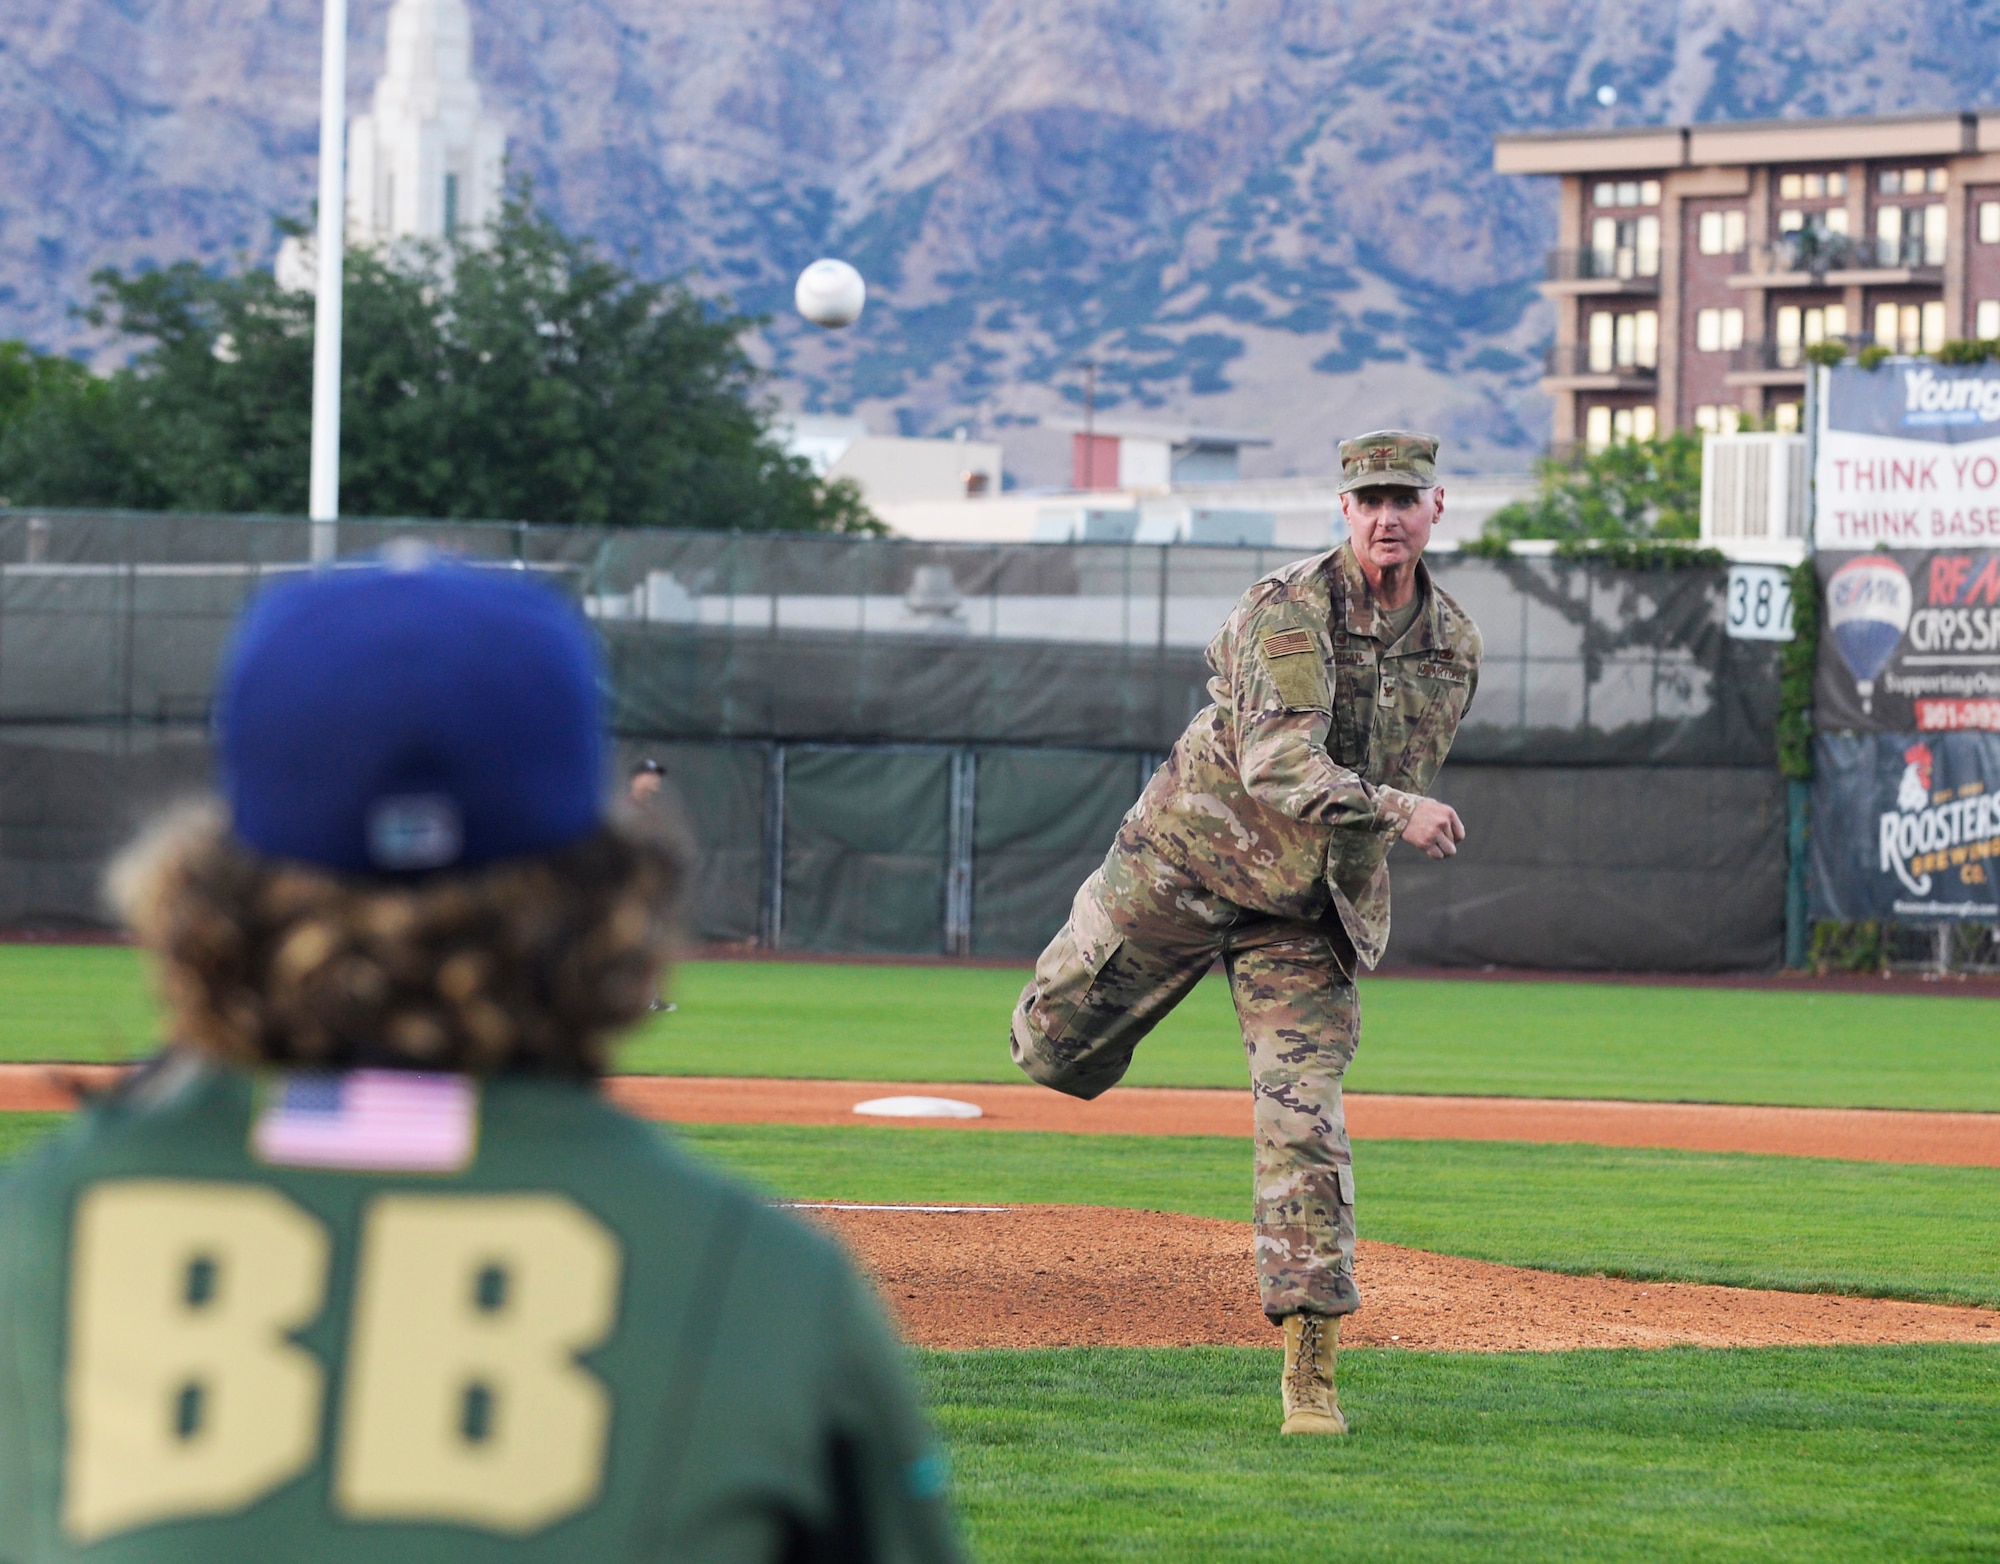 Col. Jon Eberlan, 75th Air Base Wing commander, throws the ceremonial first pitch b Aug. 9, 2019, before Military Appreciation Night with the Ogden Raptors and Idaho Falls Chuckars at Lindquist Field in Ogden, Utah. Each year, the Raptors and Top of Utah Military Affairs Committee offer tickets to Hill Air Force Base personnel and their families. (U.S. Air Force photo by David Perry)